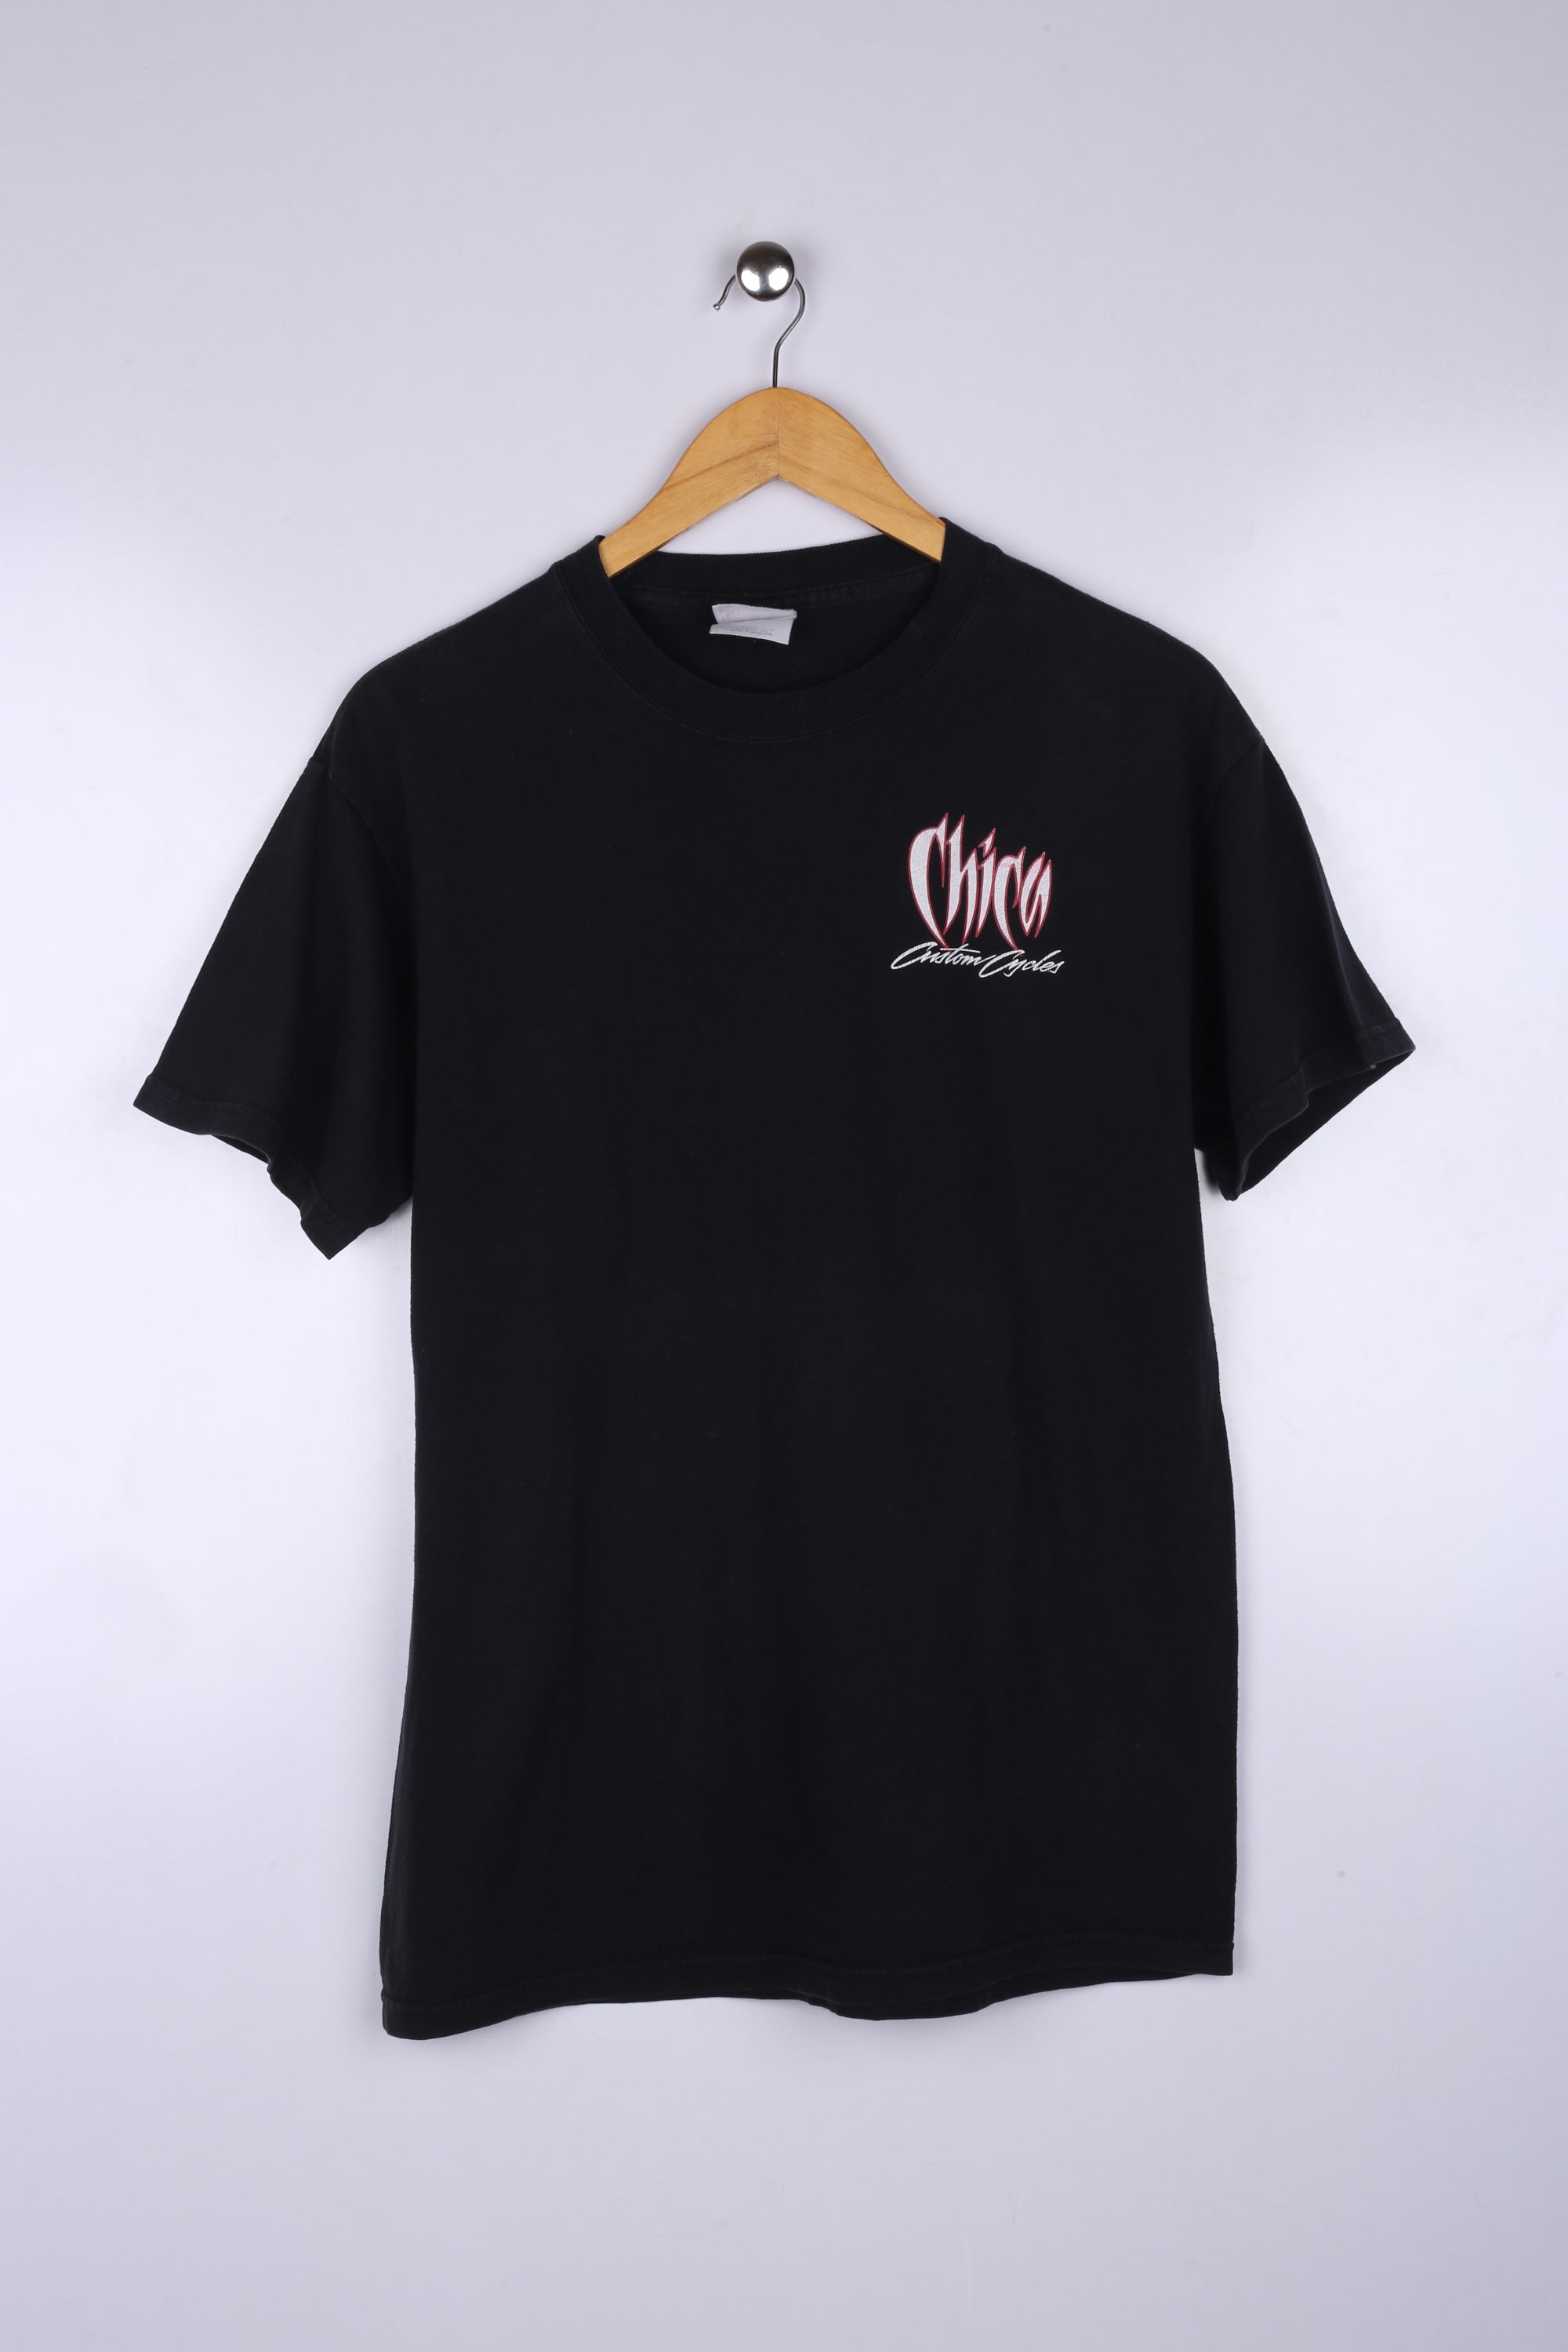 Vintage Chico Motorcycles Graphic Tee Black Large